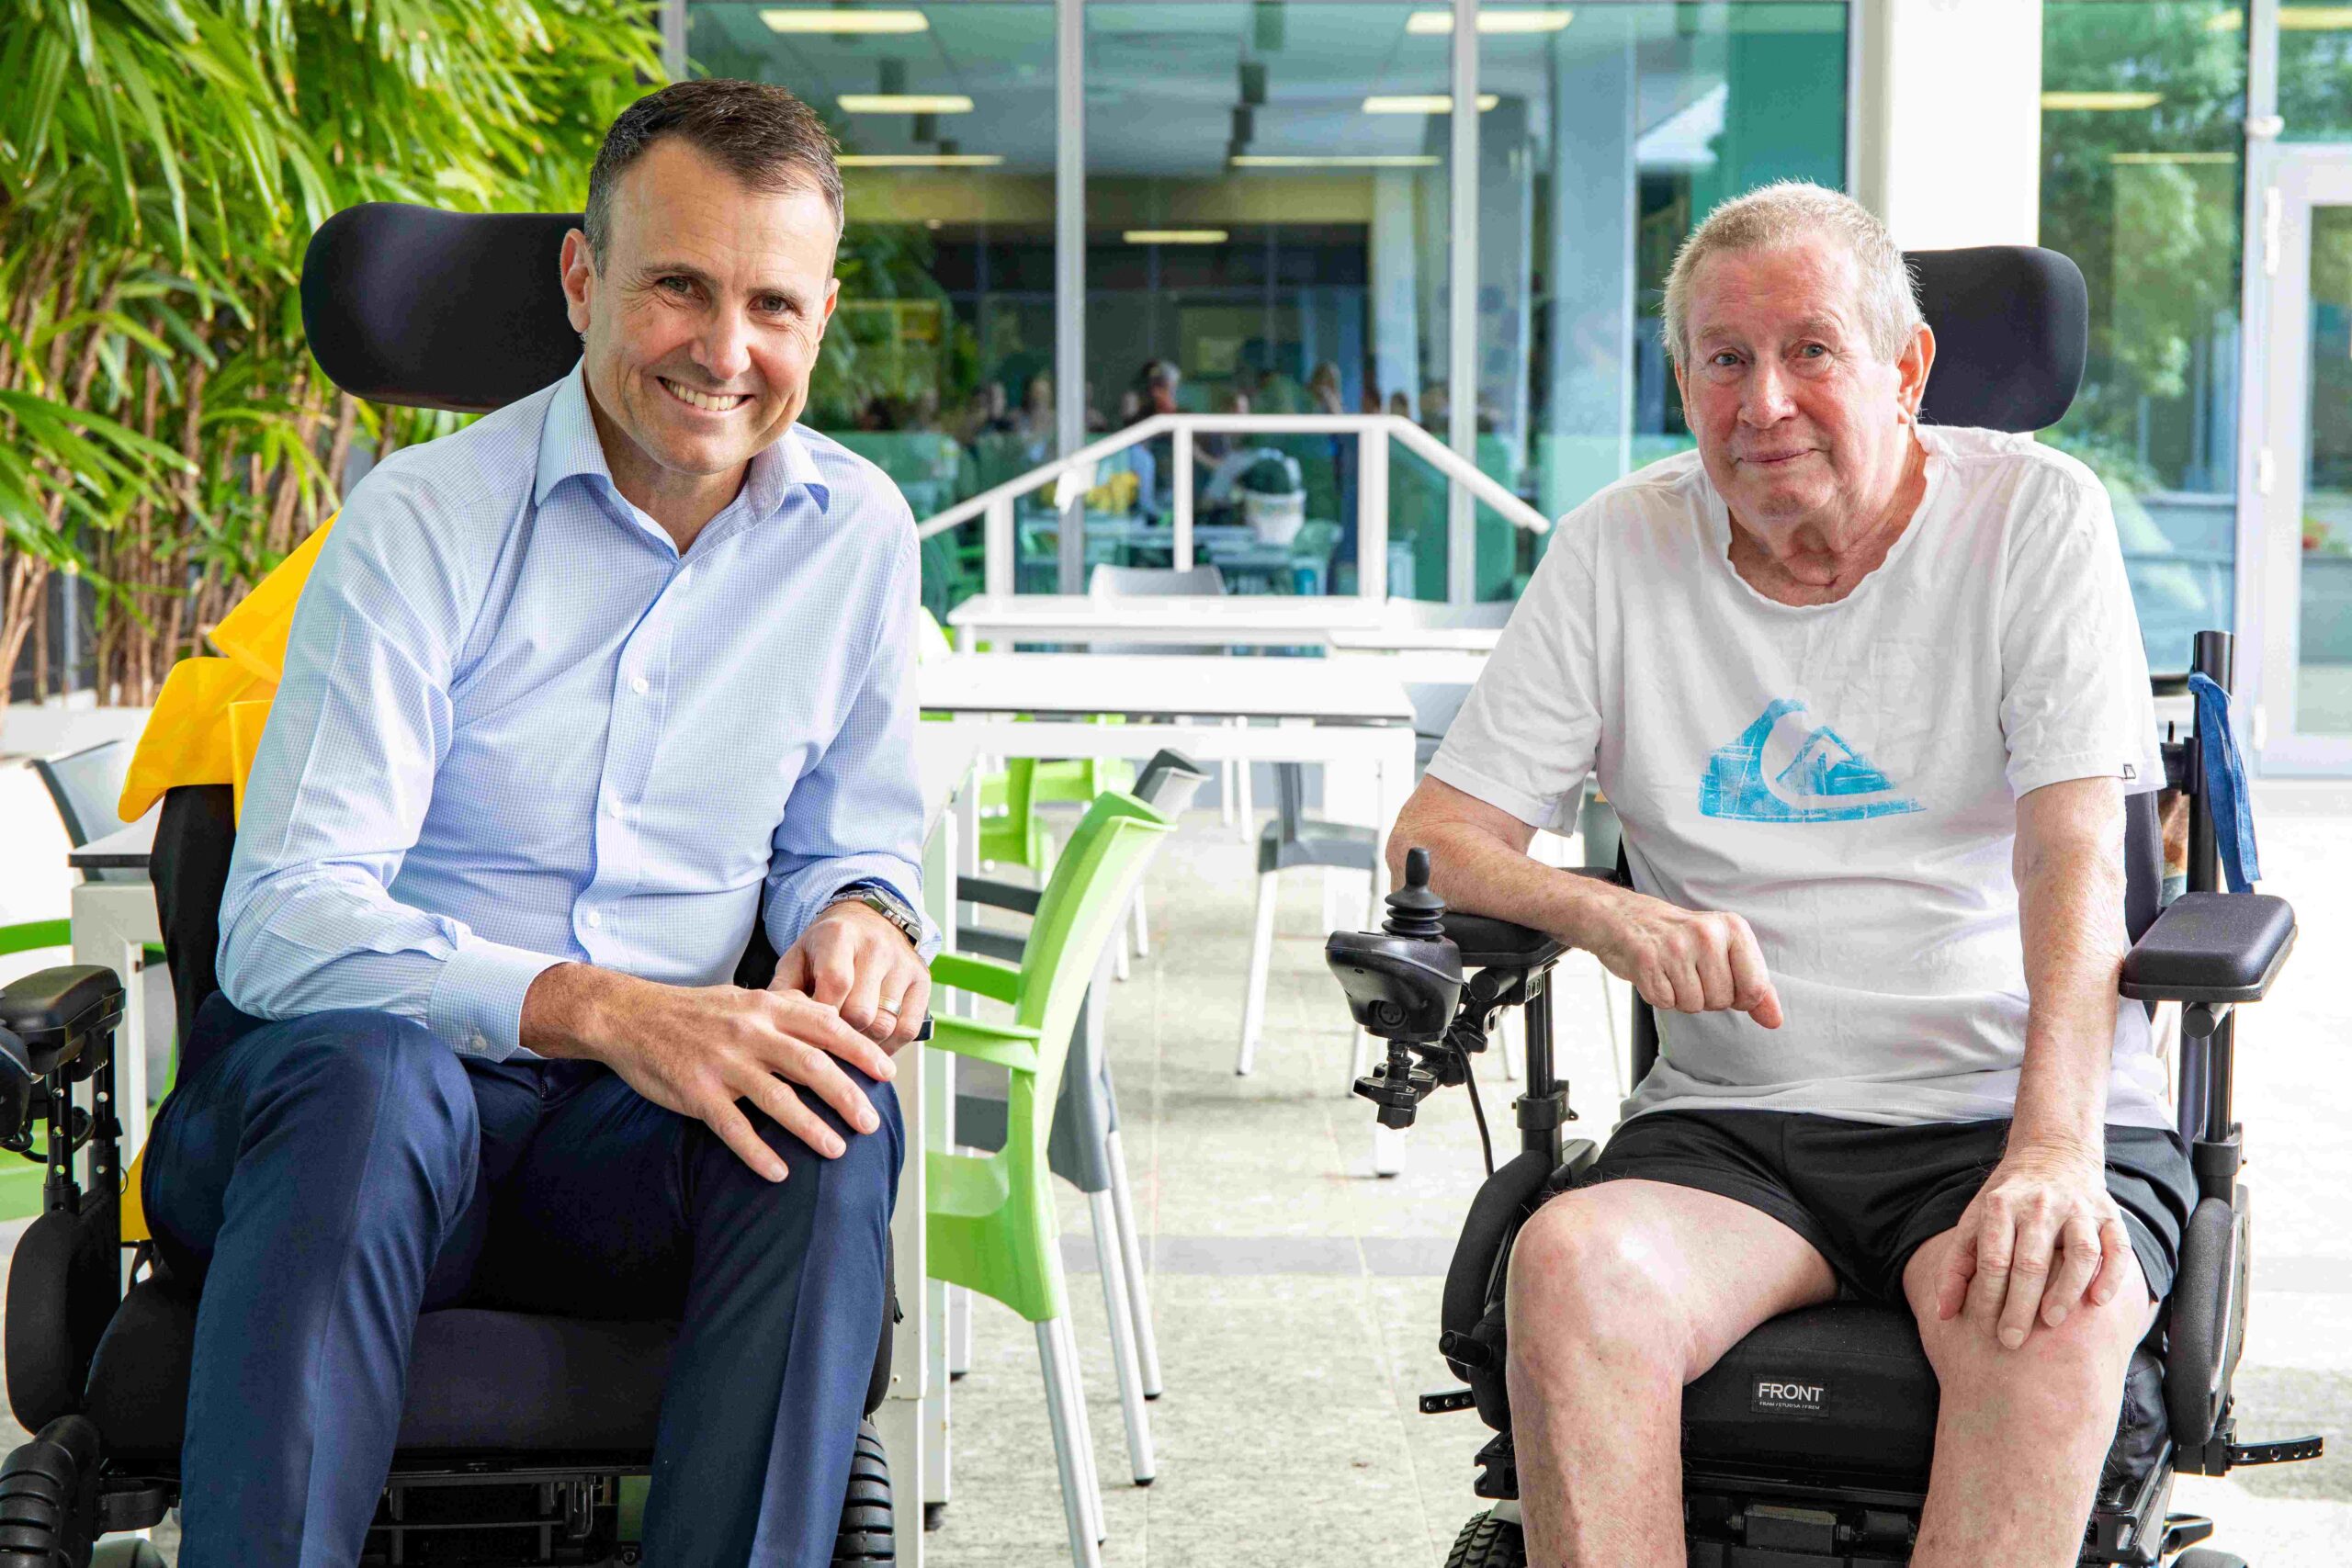 New power wheelchair a ‘game changer’ for patients